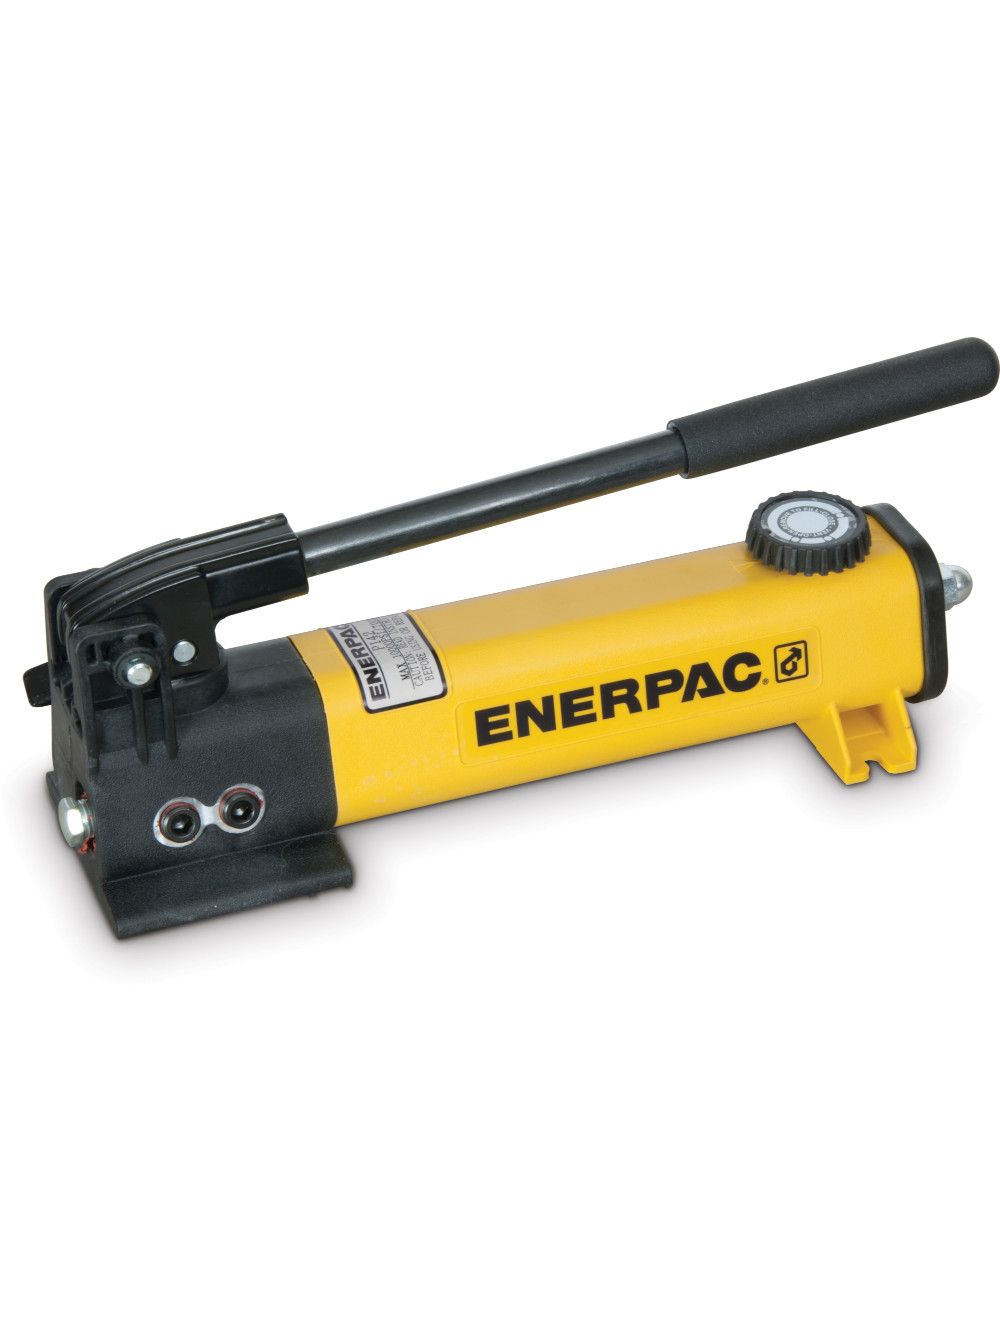 P141, Single Speed, Lightweight Hydraulic Hand Pump, 20 in3 Usable Oil  Enerpac